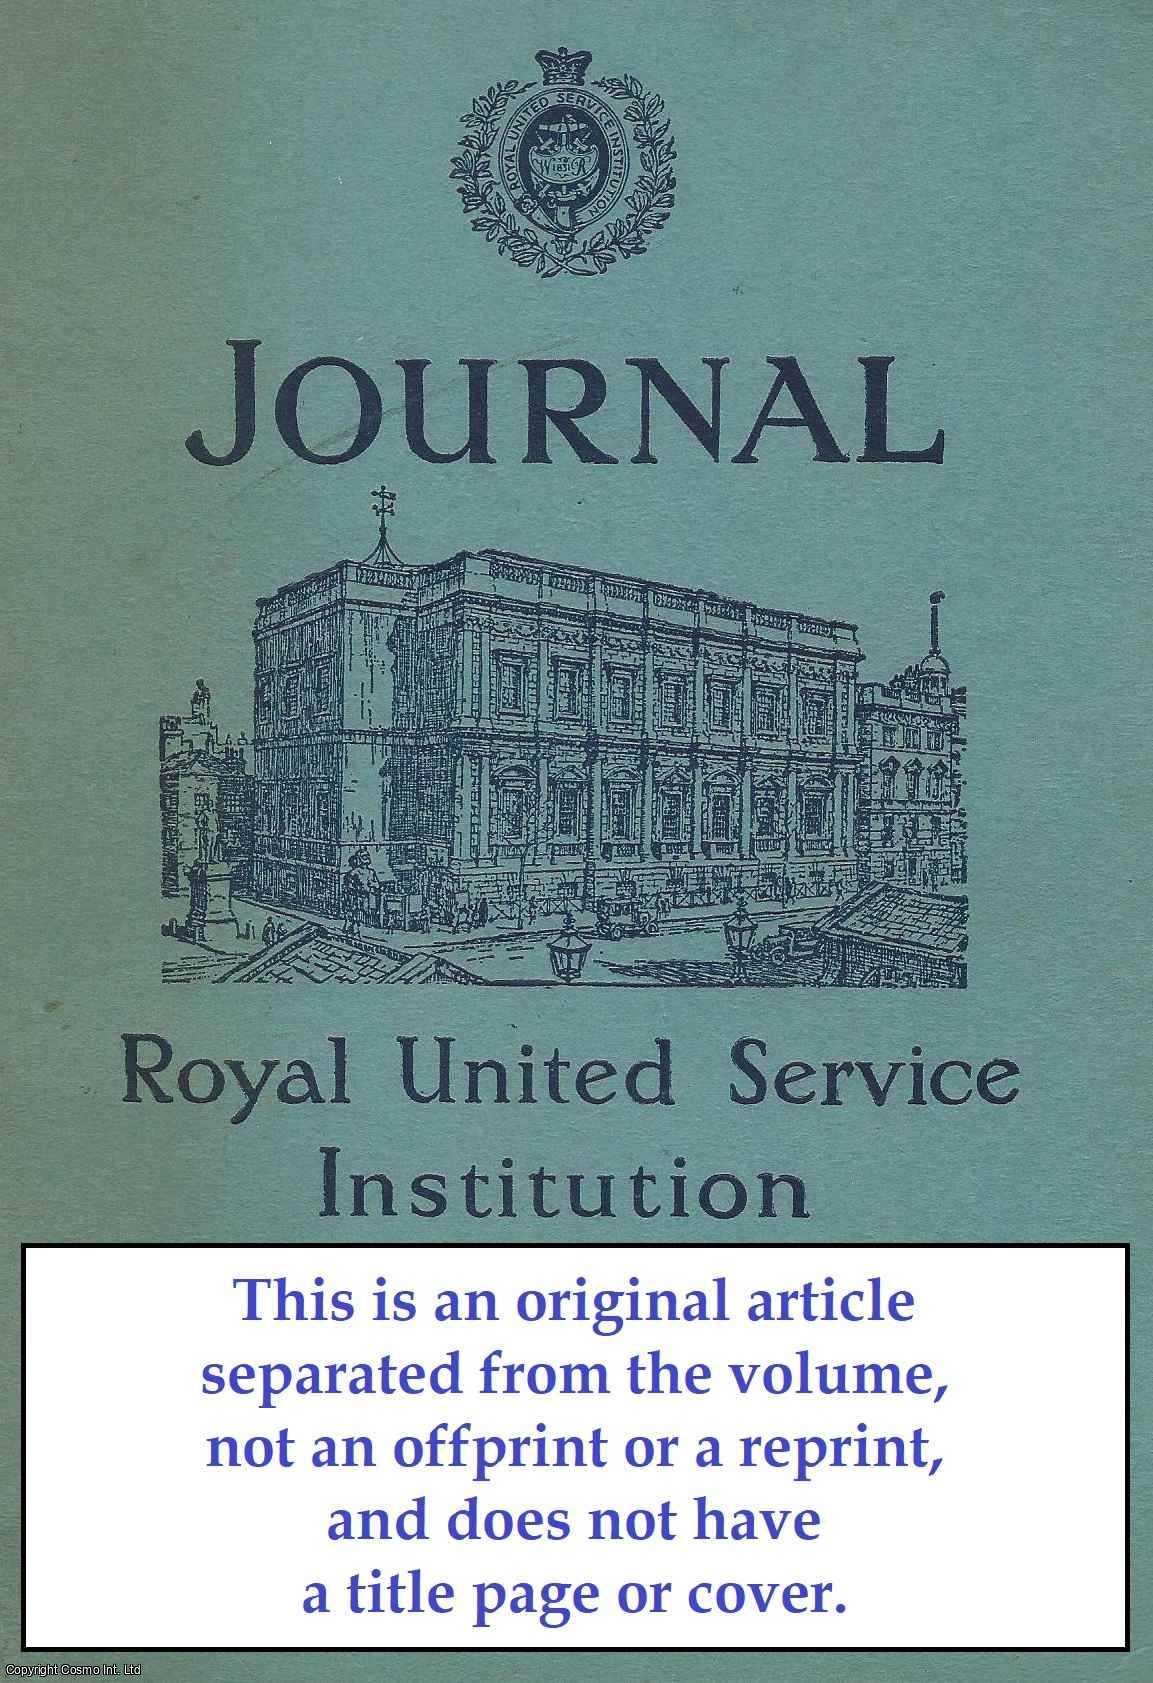 Alun Gwynne Jones - The Organization of Defence Studies. An original article from The Royal United Service Institution Journal, 1964.